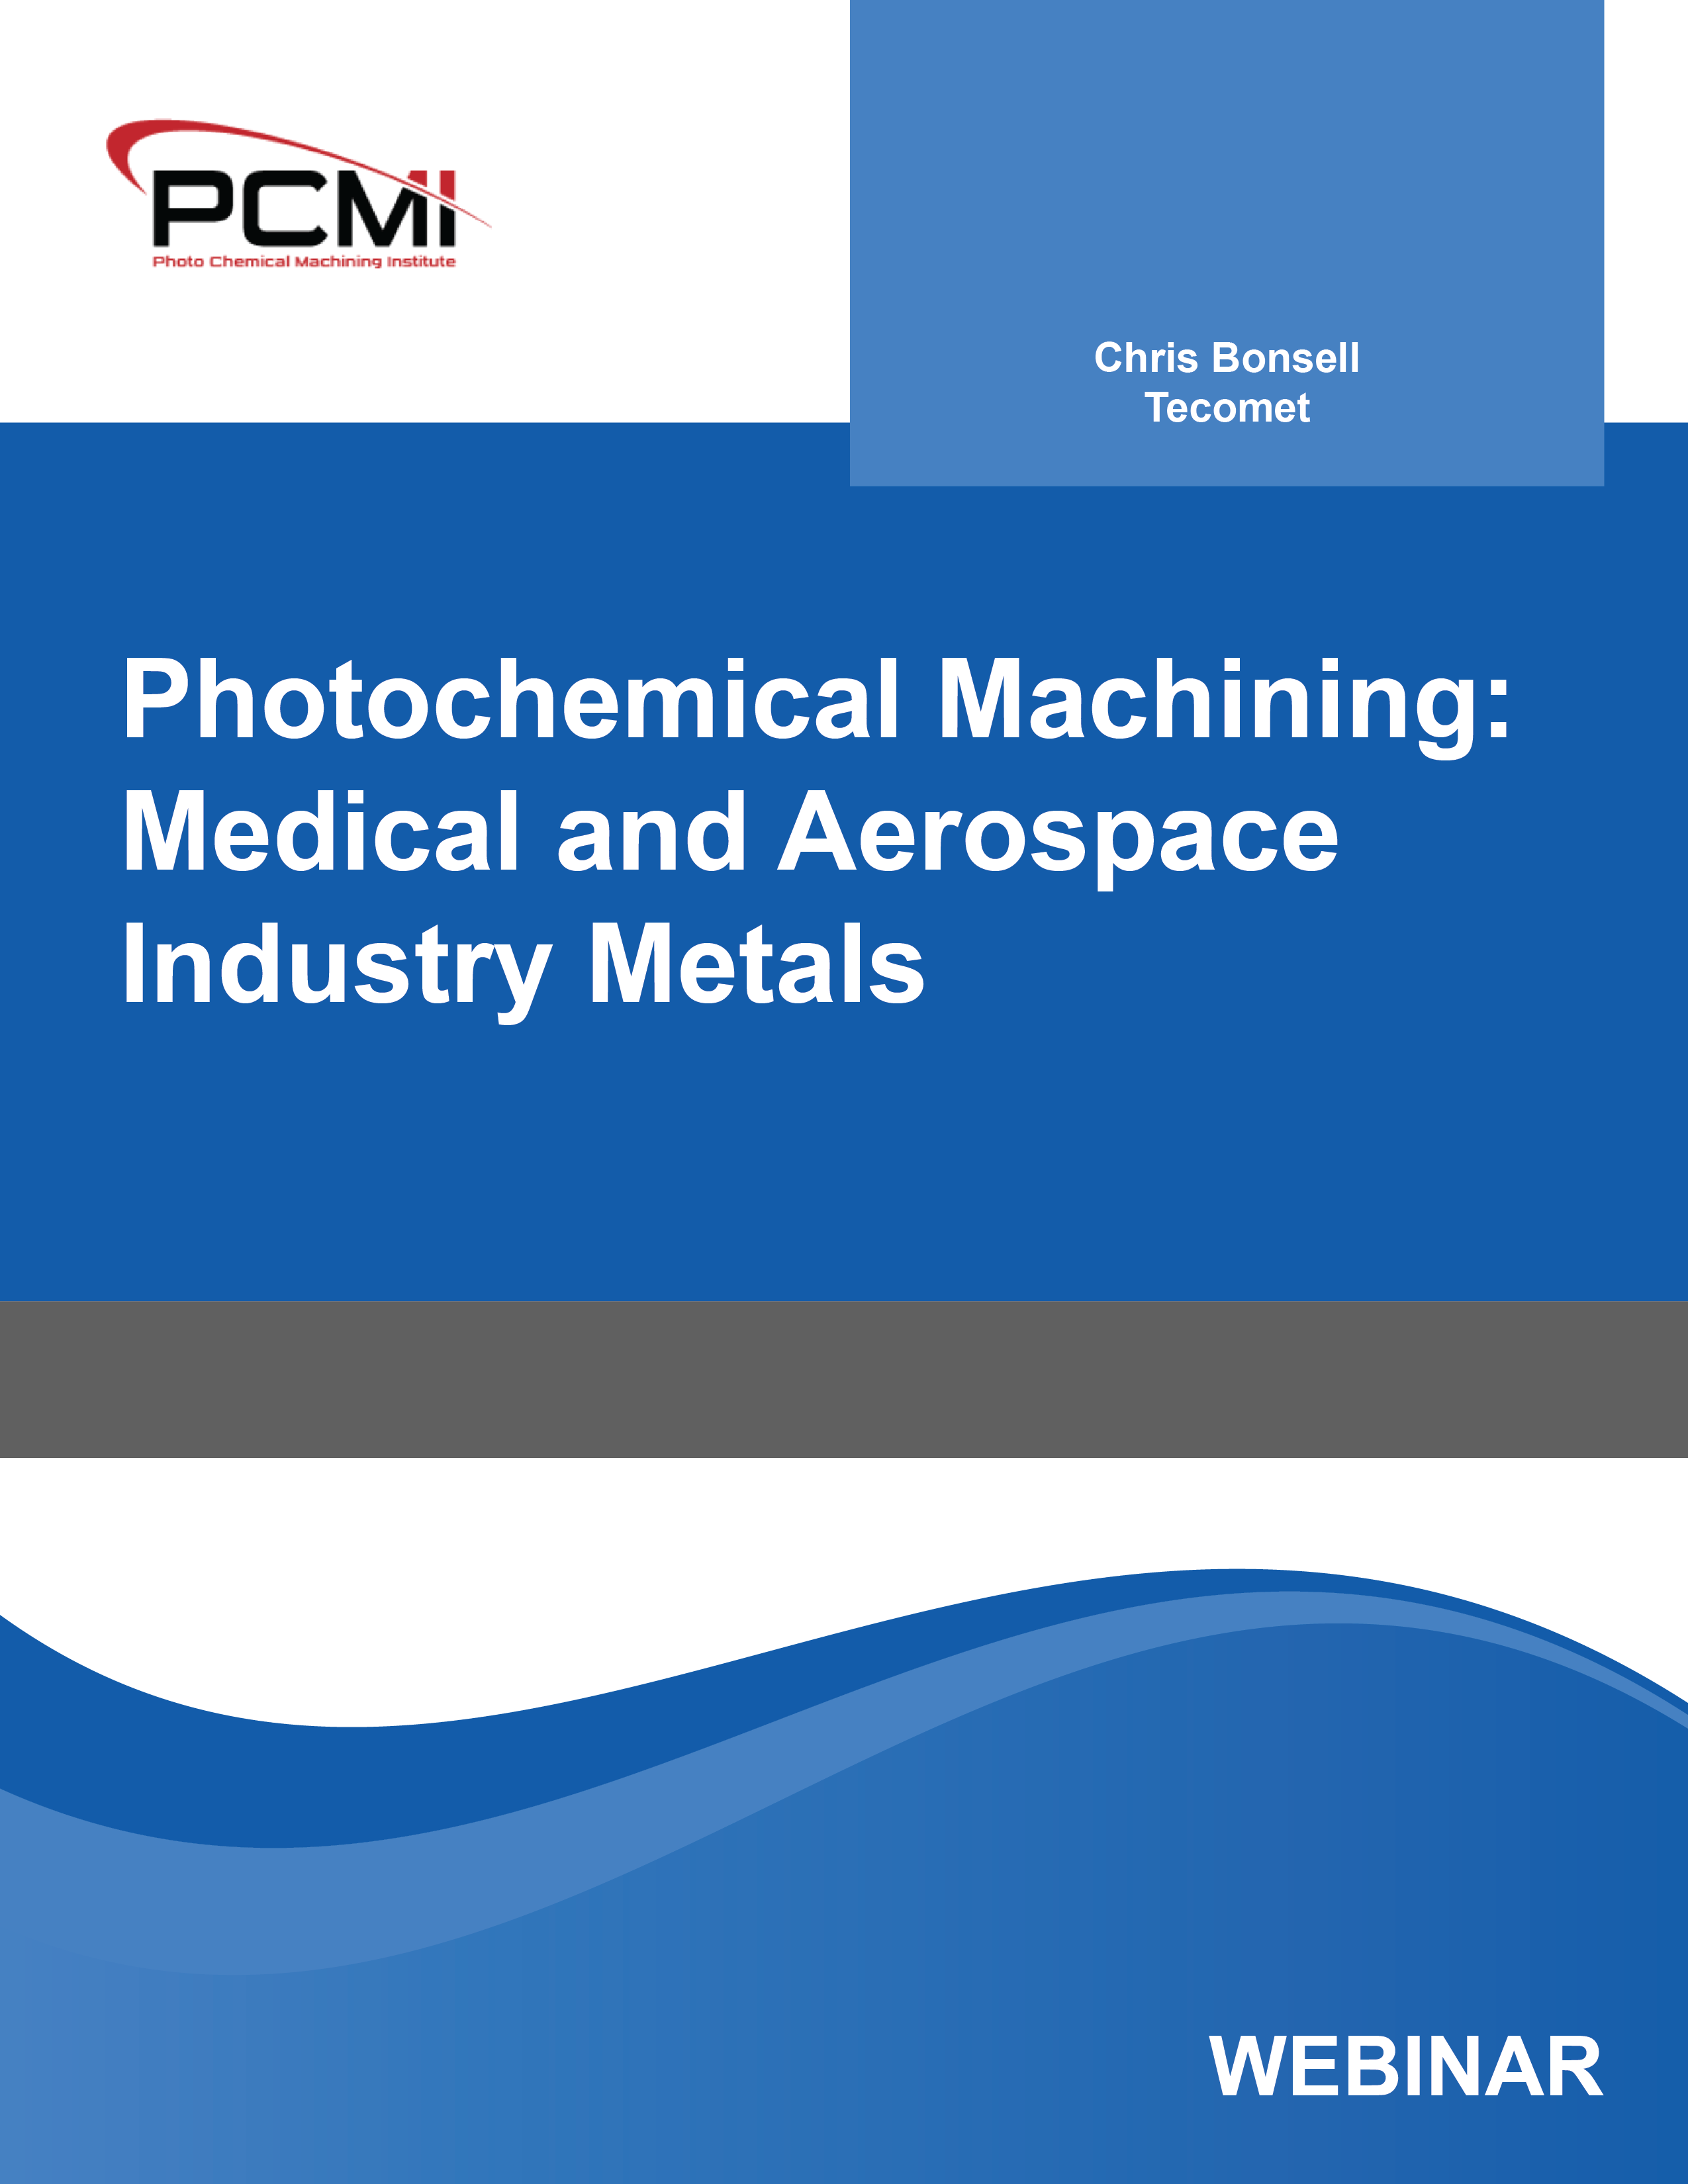 Photochemical Machining: Medical and Aerospace Industry Metals